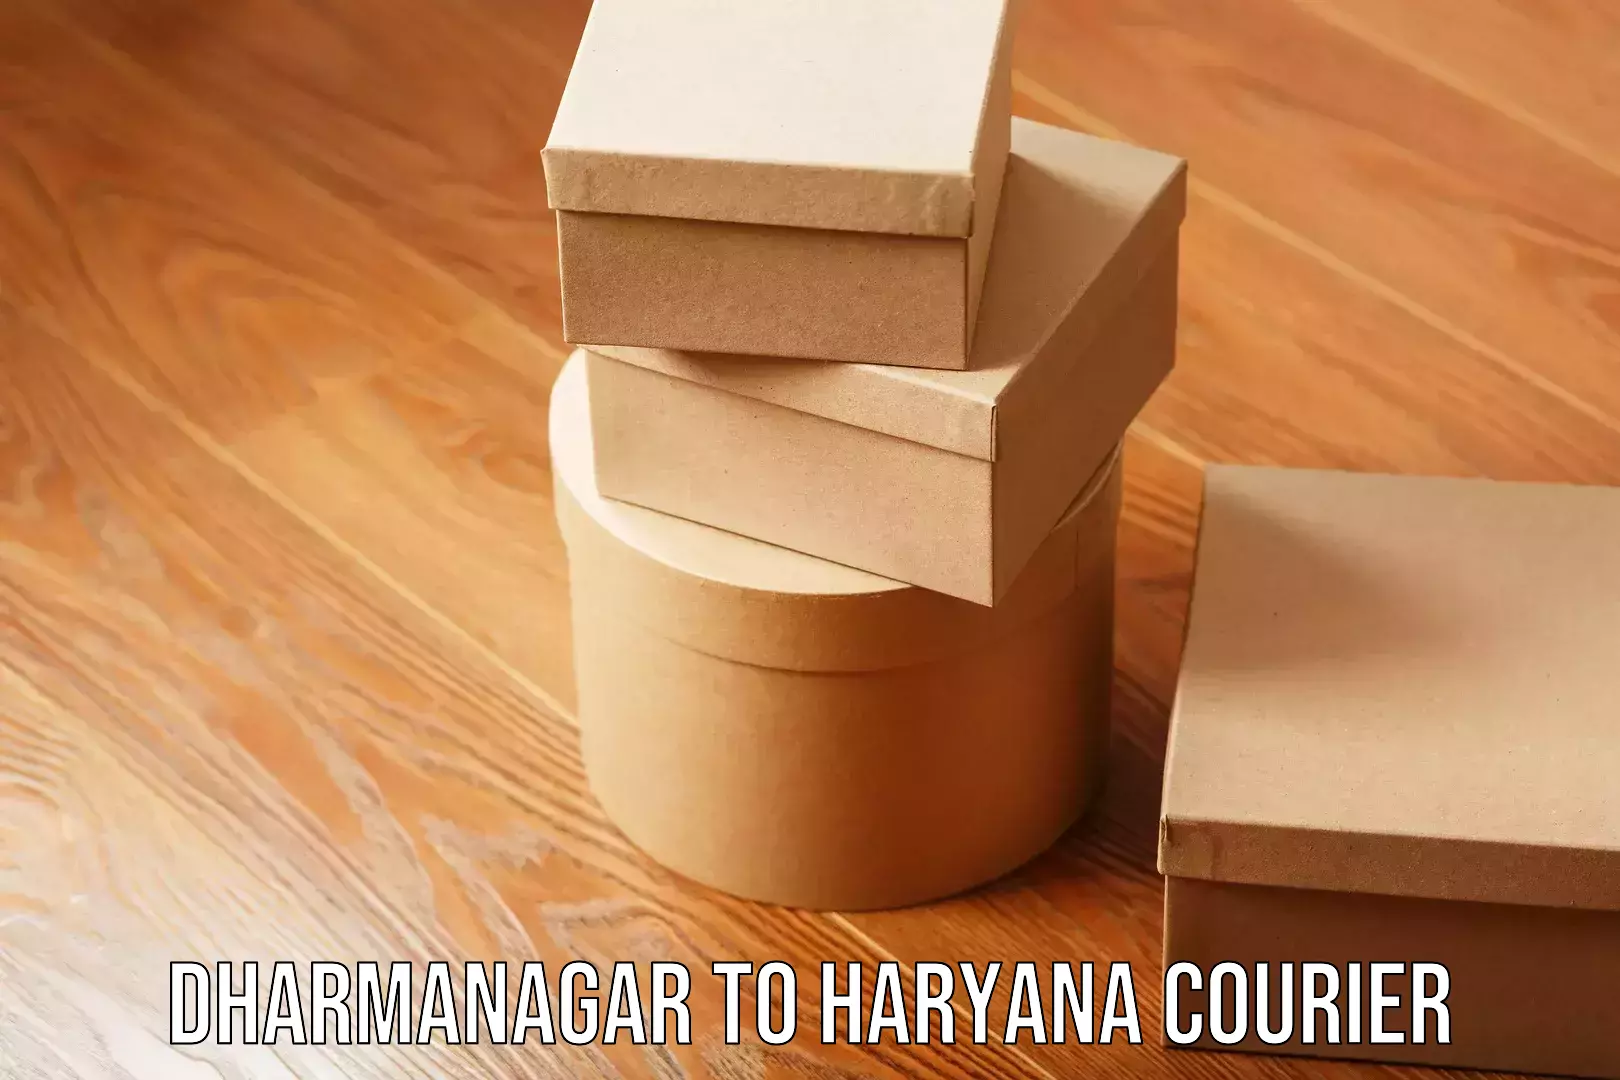 End-to-end delivery Dharmanagar to Haryana